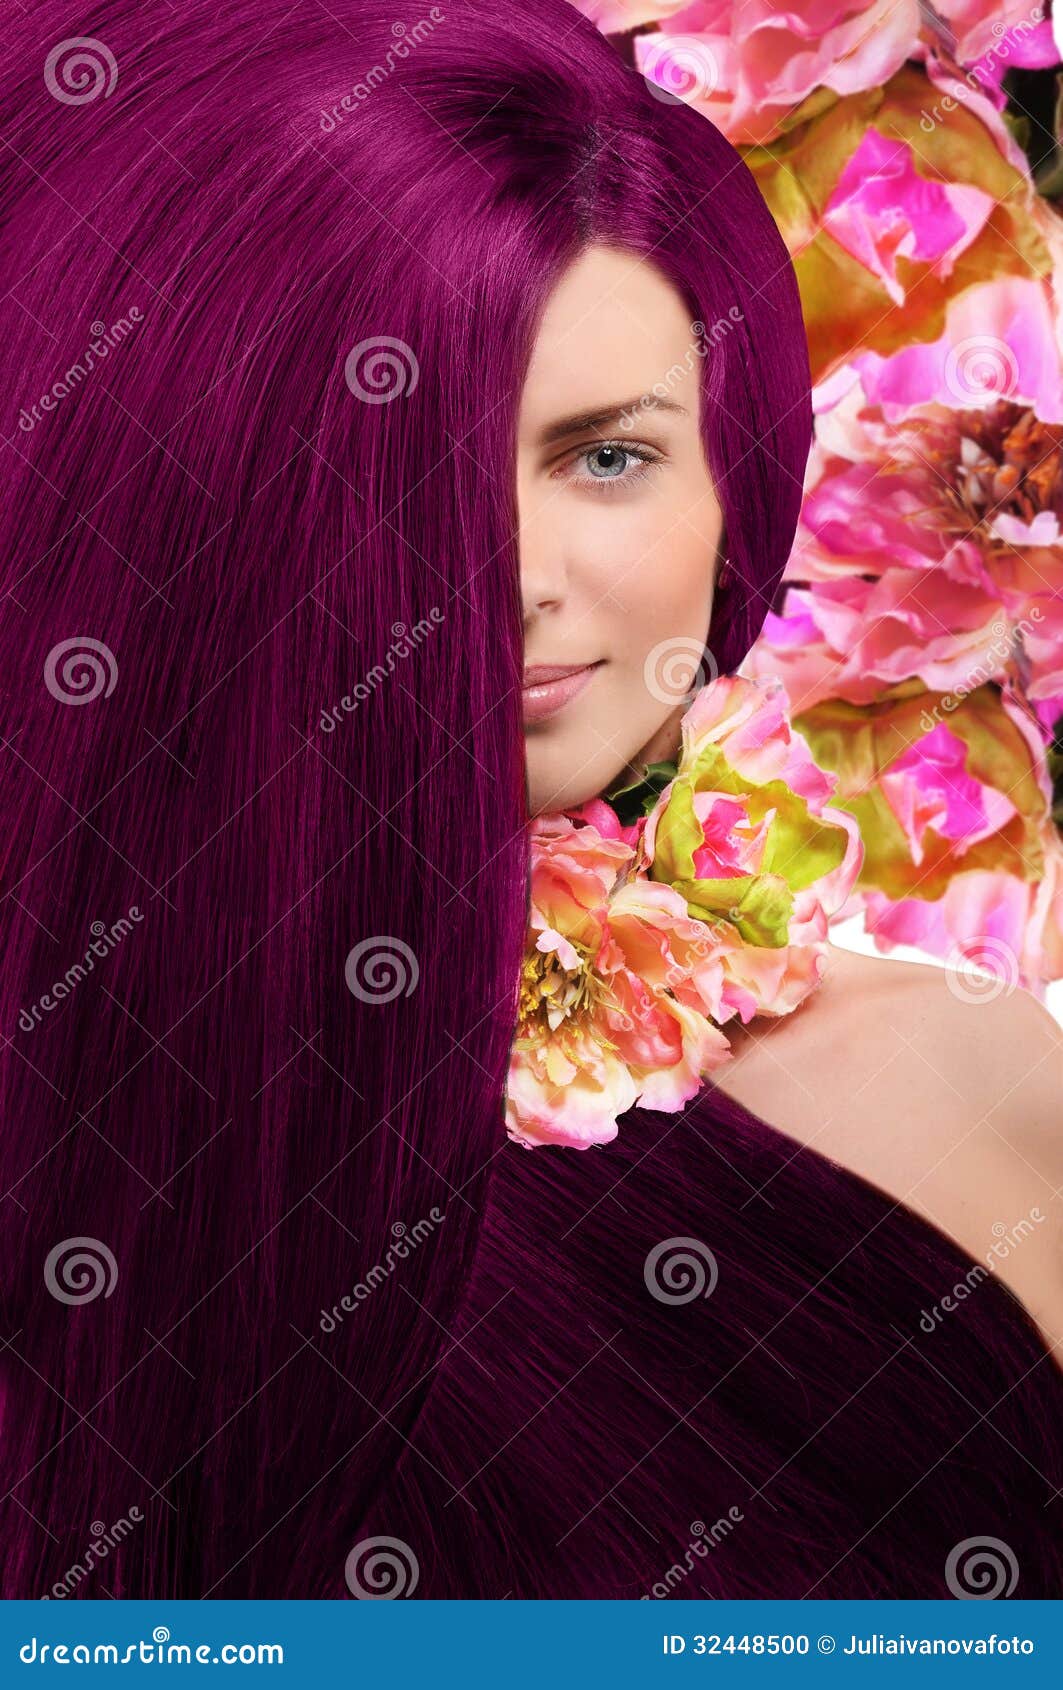 Portrait of a Girl with Burgundy Hair on Floral Background Stock Photo -  Image of hair, young: 32448500